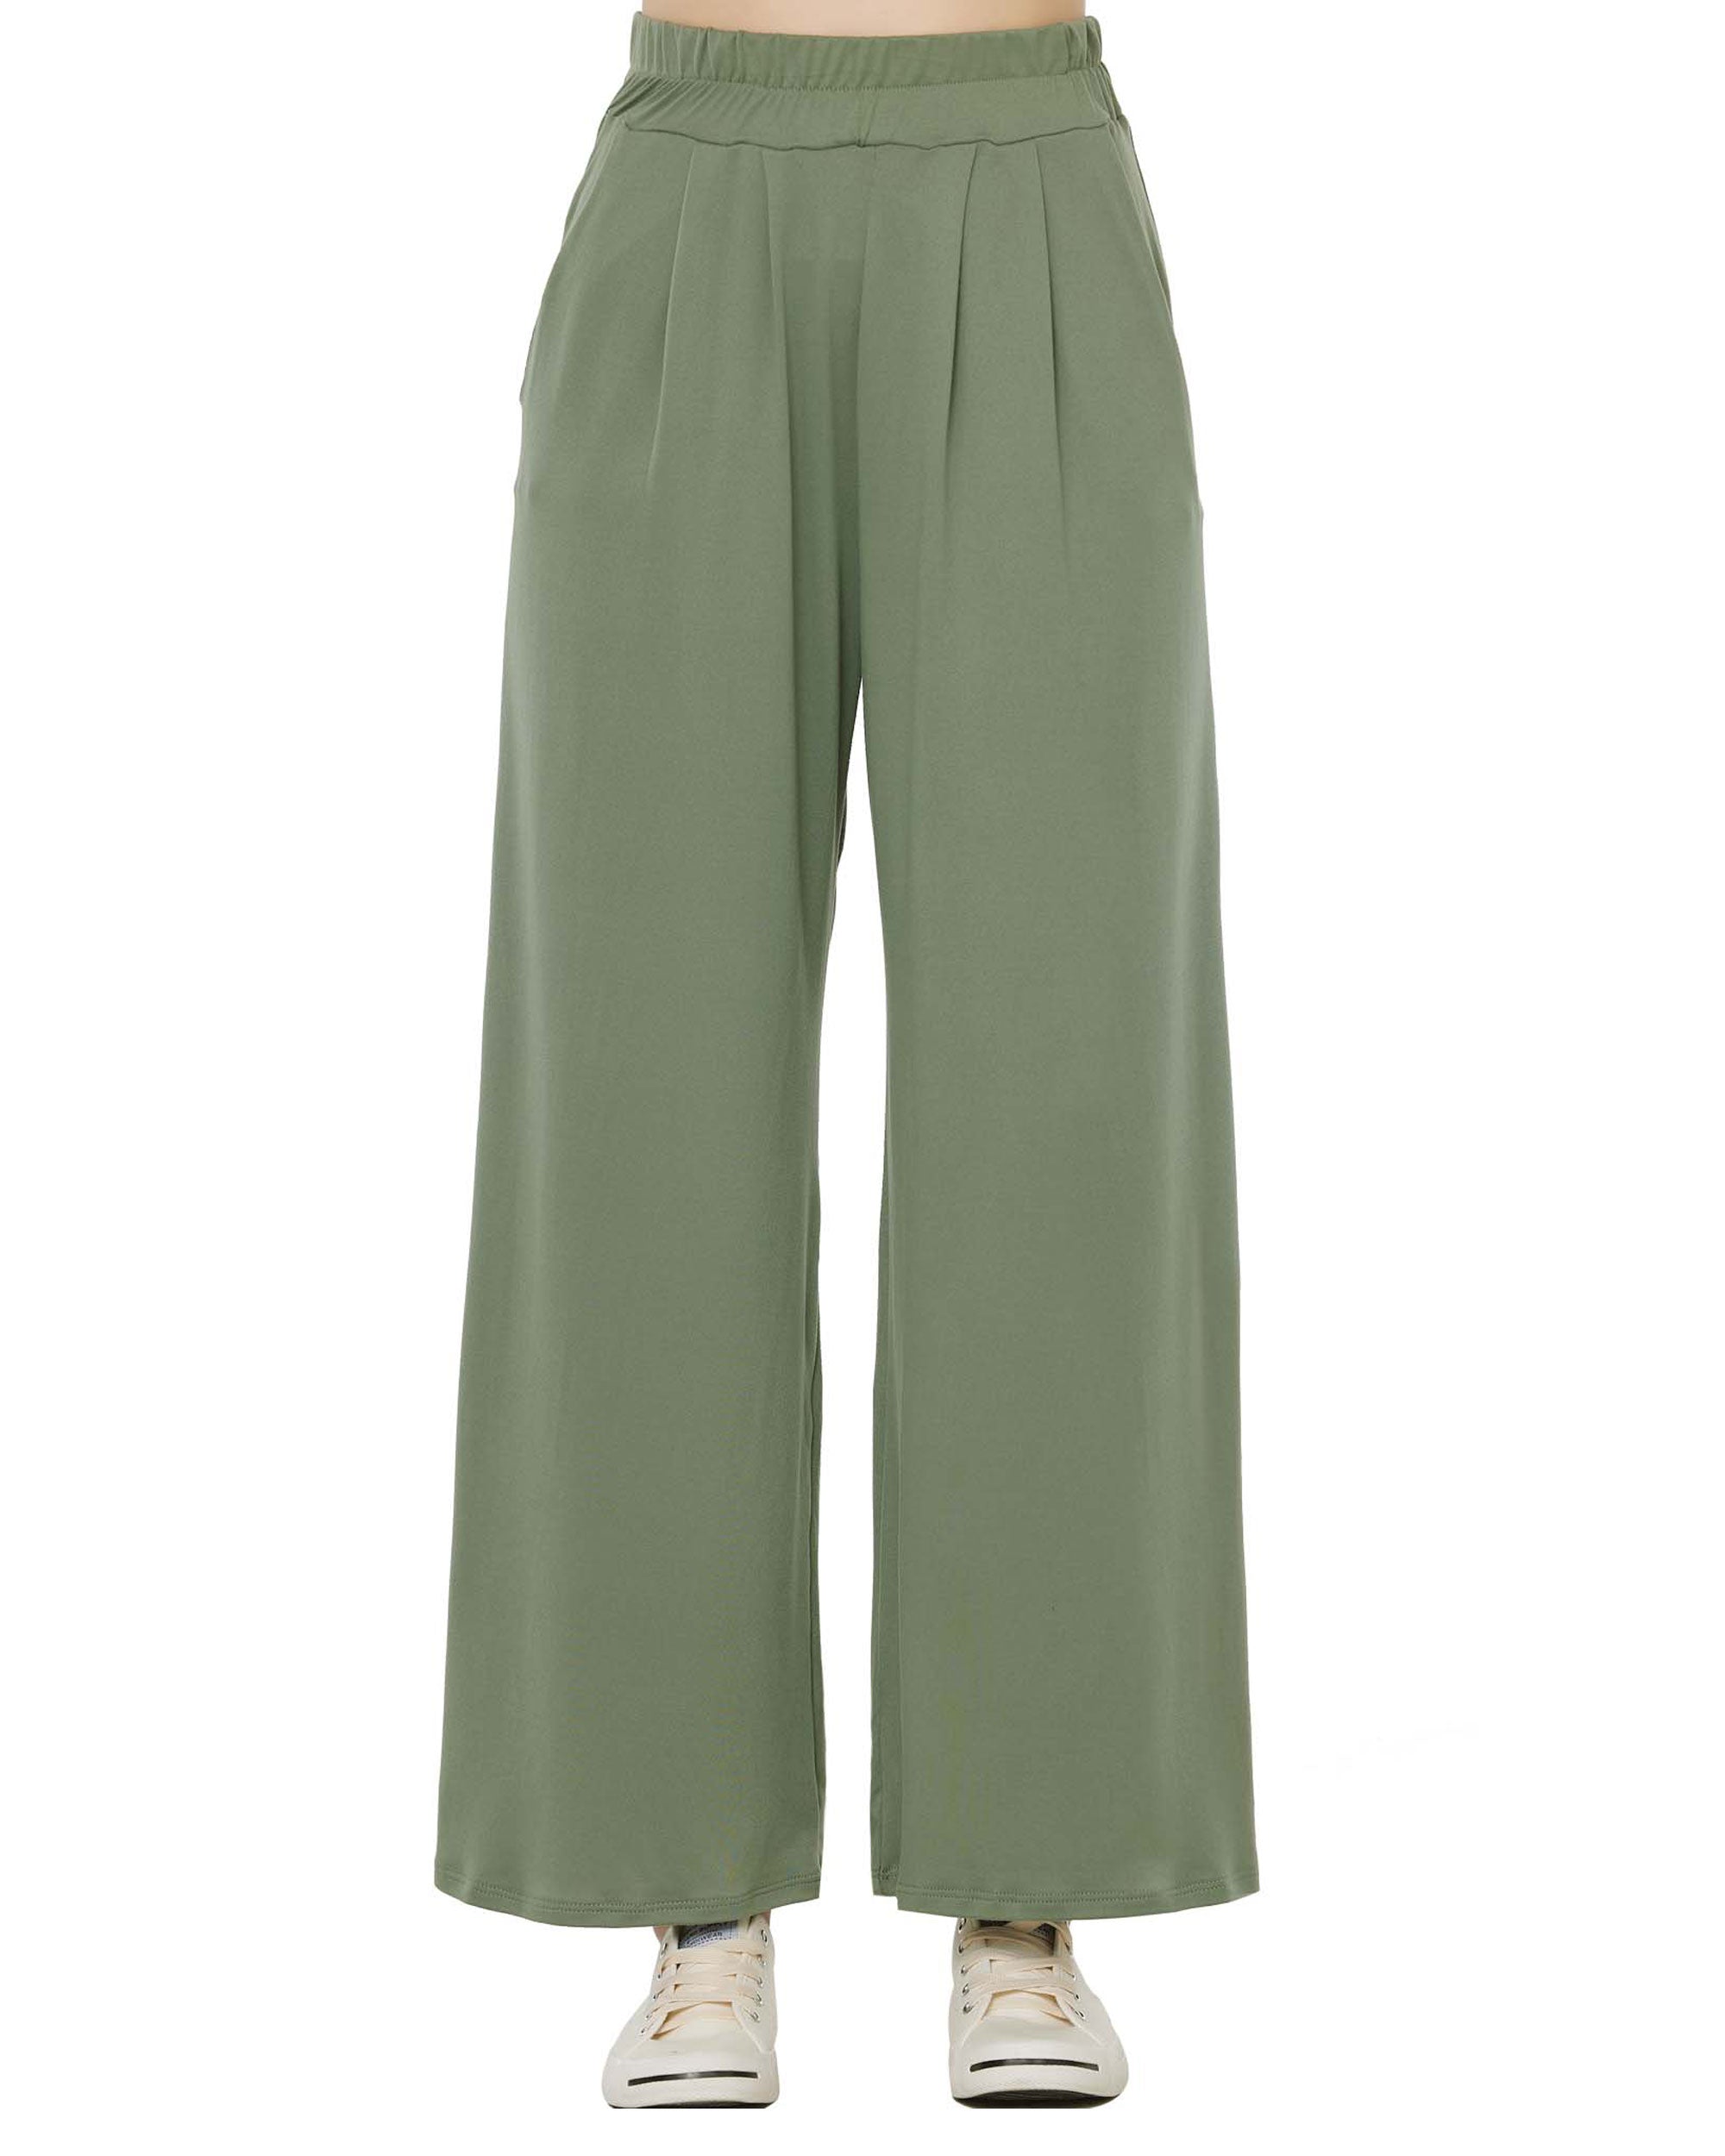 Olive High Waisted Knit Wide Leg Pants for You